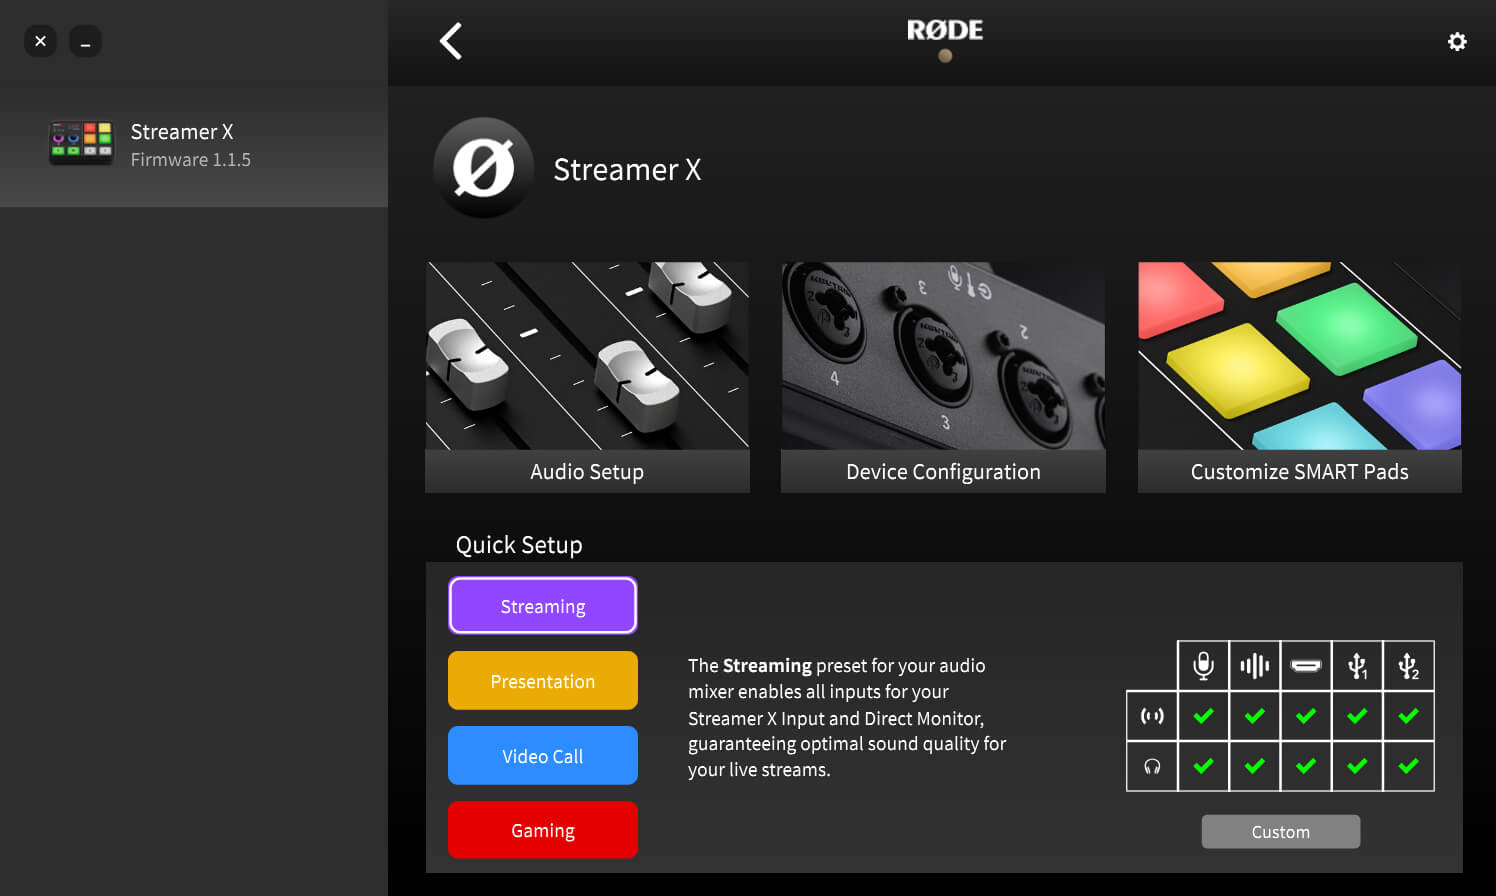 Streamer X connected to RØDE Central